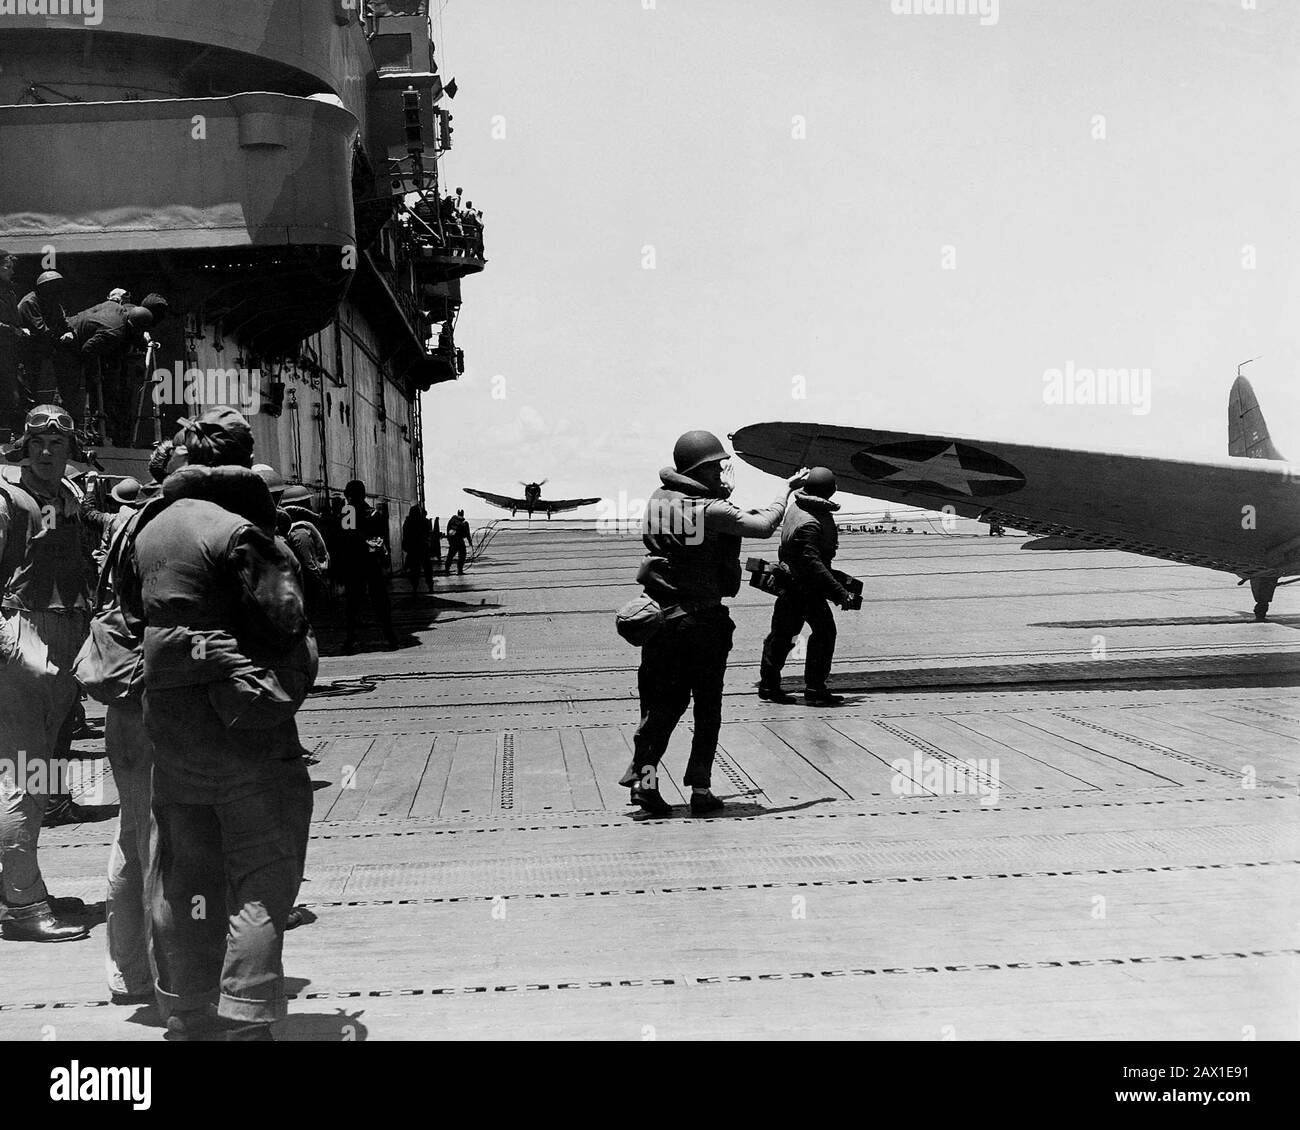 1942 , 6 june , USA : BATTLE OF MIDWAY  . A U.S. Navy Douglas SBD-3 Dauntless of bombing squadron VB-8 or scouting squadron VS-8 landing on the aircraft carrier USS Hornet (CV-8) during the Battle of Midway, 4 June 1942. Note the personnel wearing battle gear and the pilot in full flight gear, including leather helmet, Mae West, and flight suit. VB-8 and VS-8 did not locate the Japanese fleet during operations on 4 June 1942, losing six aircraft between them. However, on 6 June the squadrons participated in attacks against the Japanese cruisers Mogami and Mikuma  -  WORLD WAR II - WWII - SECON Stock Photo